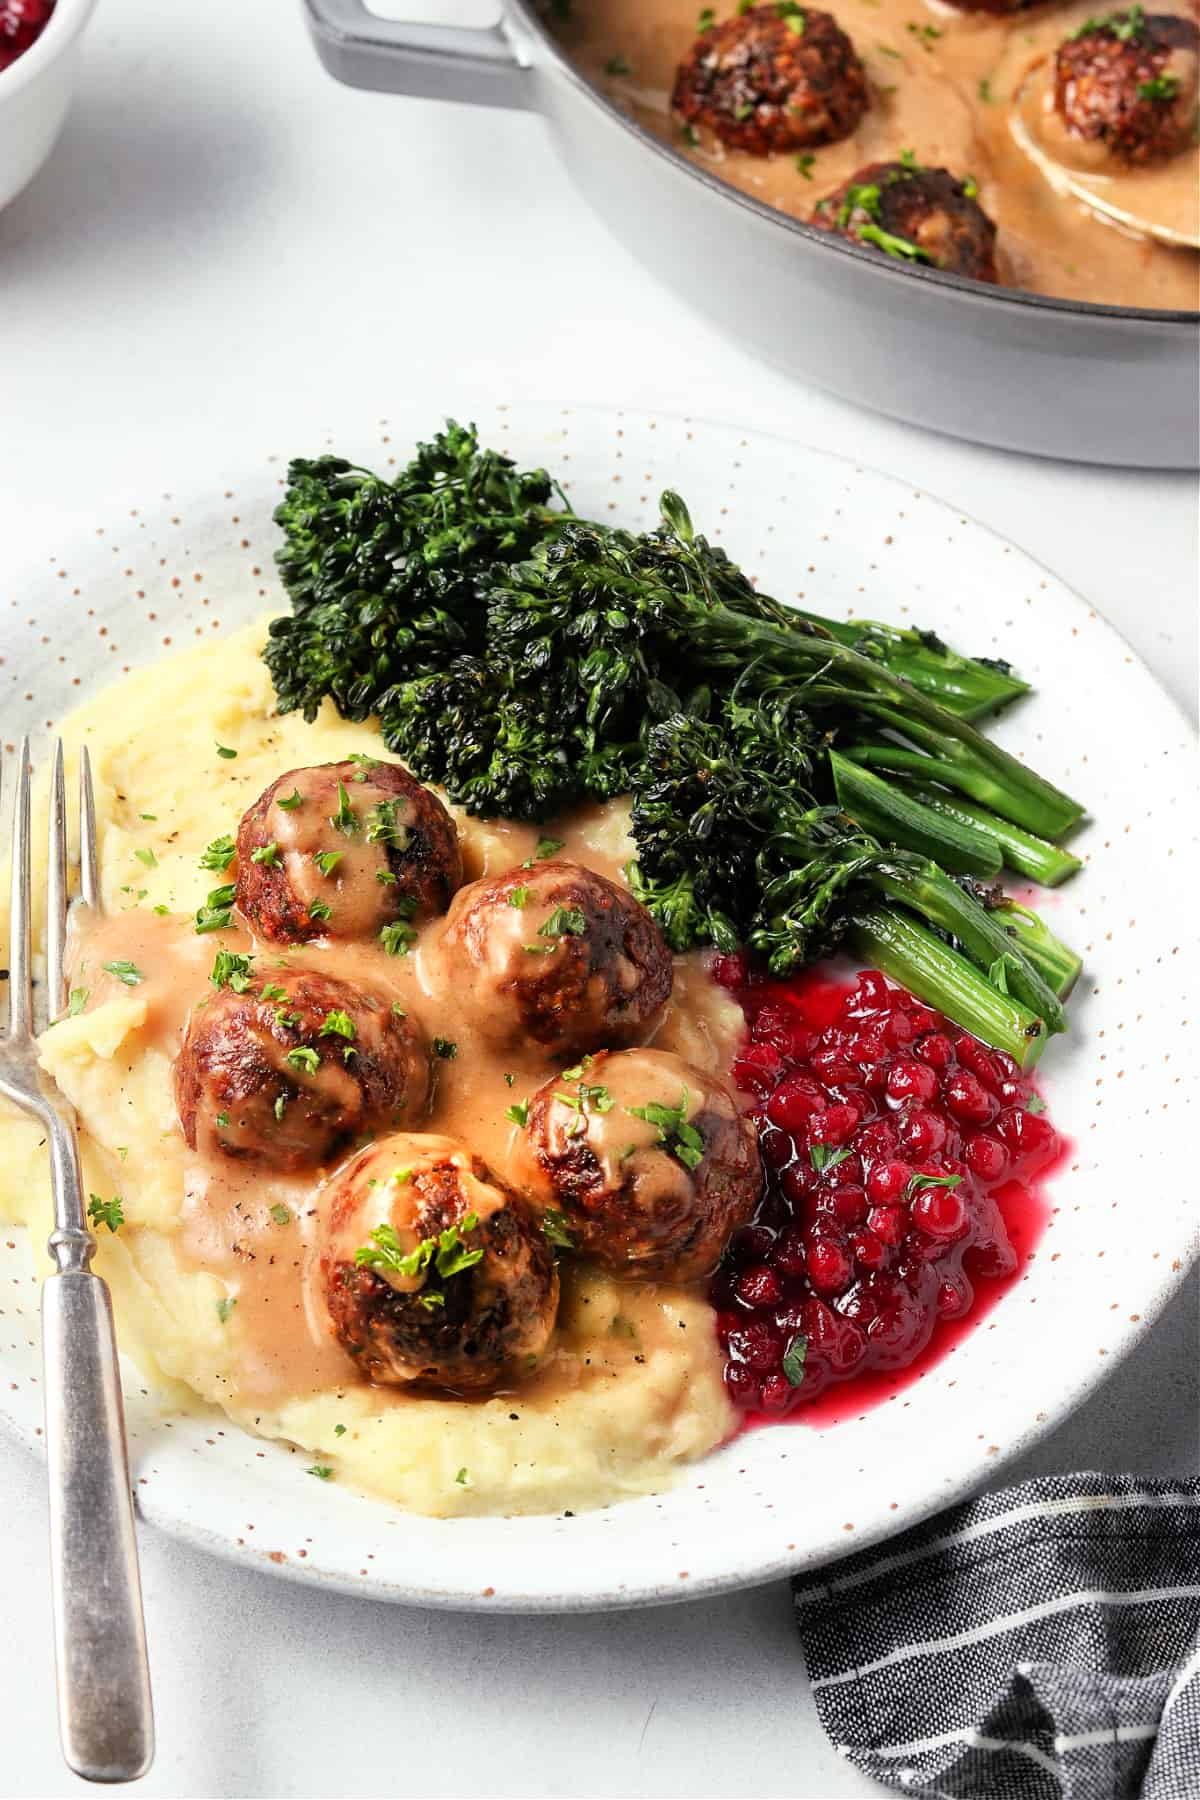 meatballs on a bed of mashed potatoes with gravy on top. Jam and broccoli on the side. 